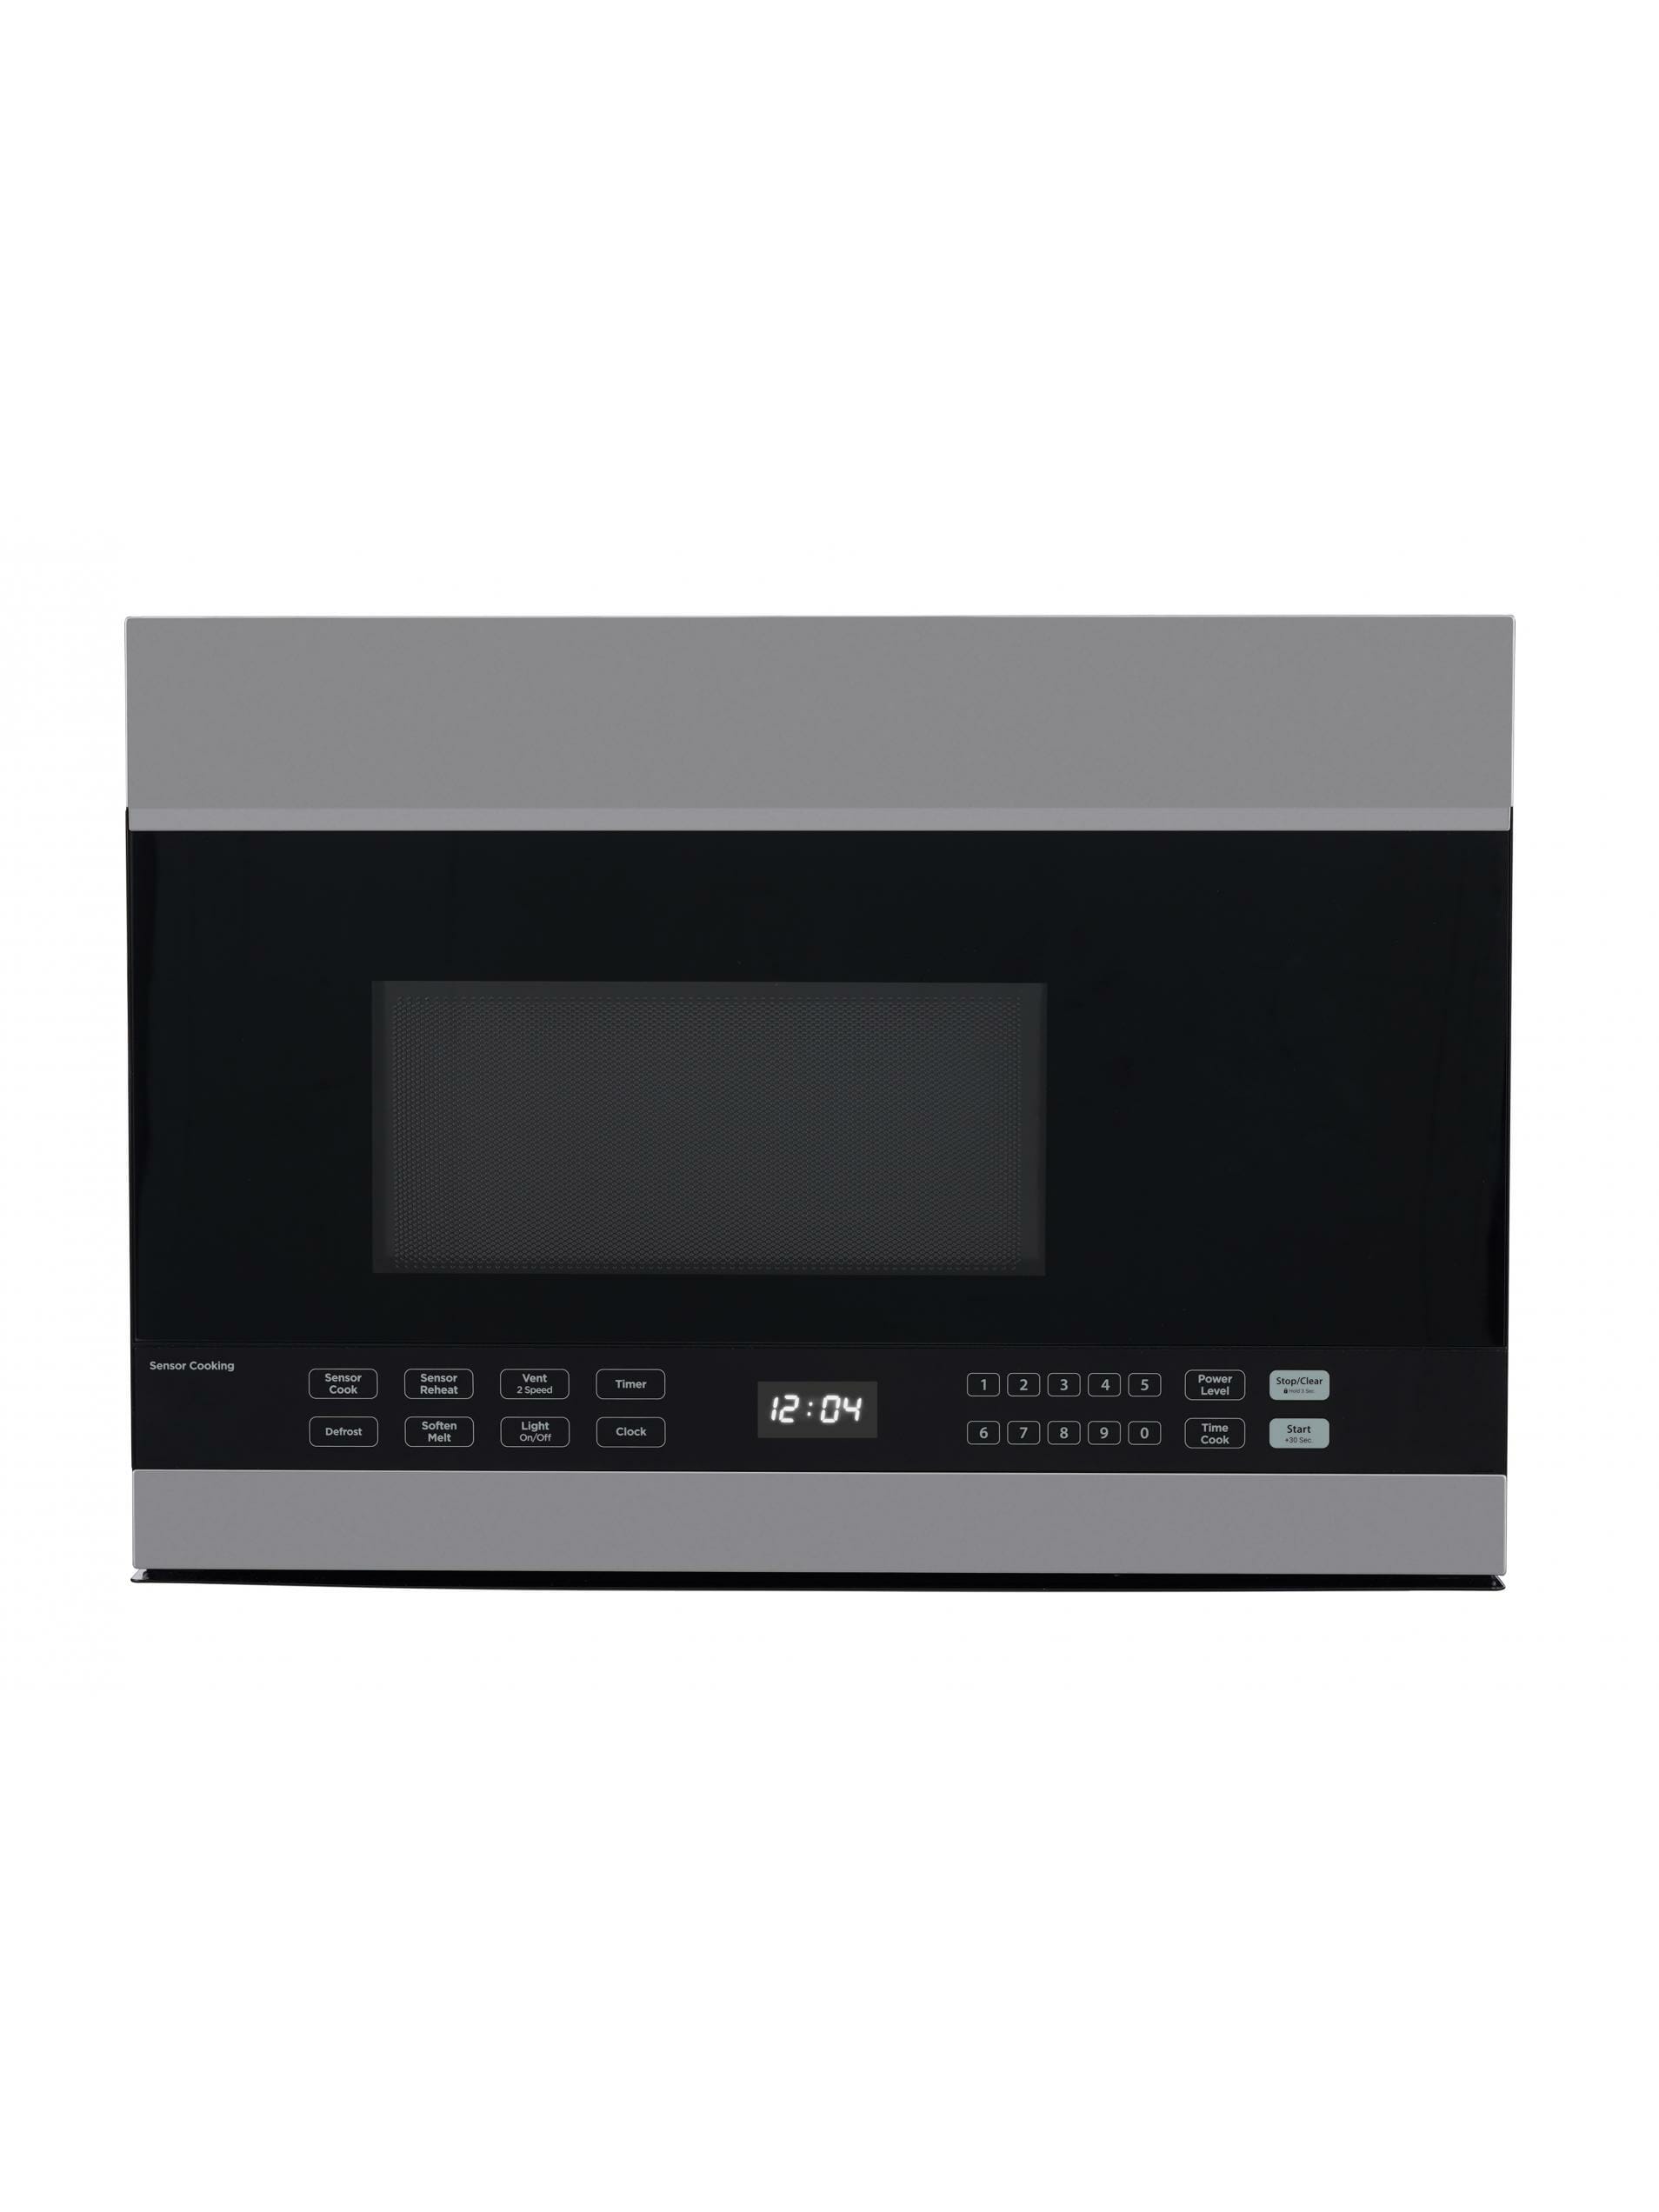 Danby - 24" OTR Microwave with Sensor Cooking Controls, 10 Power Levels OTR - DOM014401G1